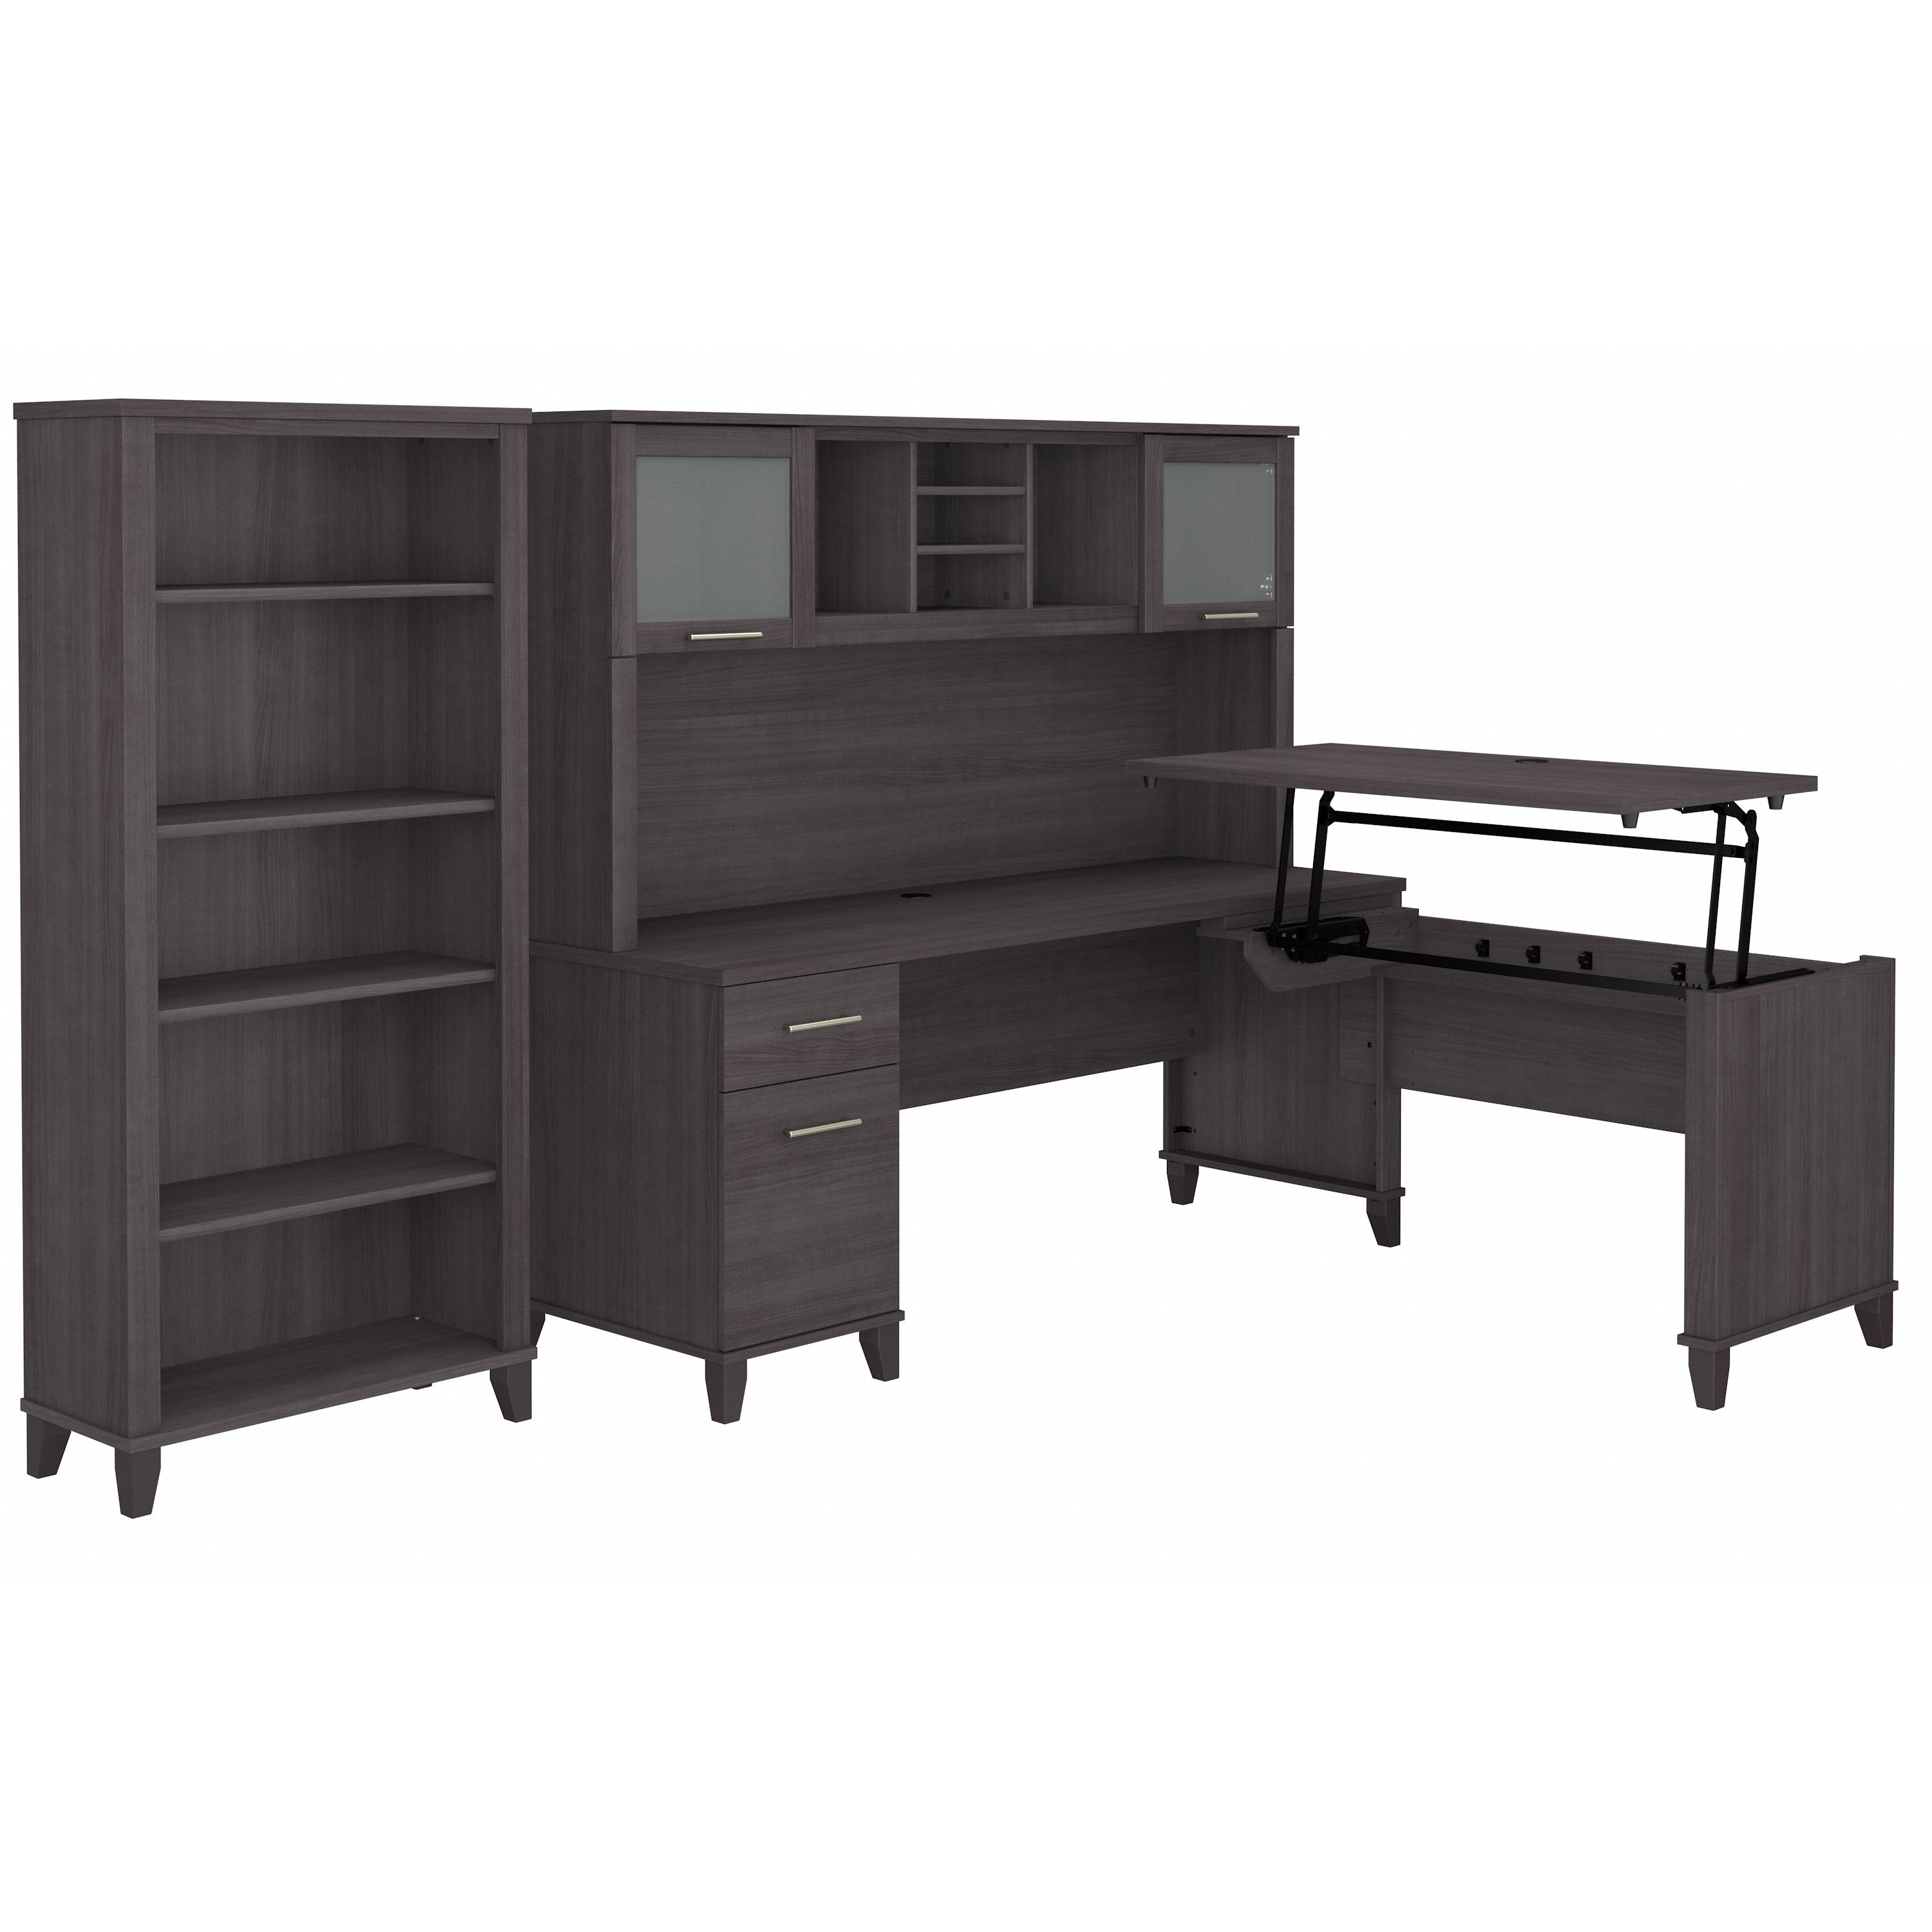 Shop Bush Furniture Somerset 72W 3 Position Sit to Stand L Shaped Desk with Hutch and Bookcase 02 SET017SG #color_storm gray